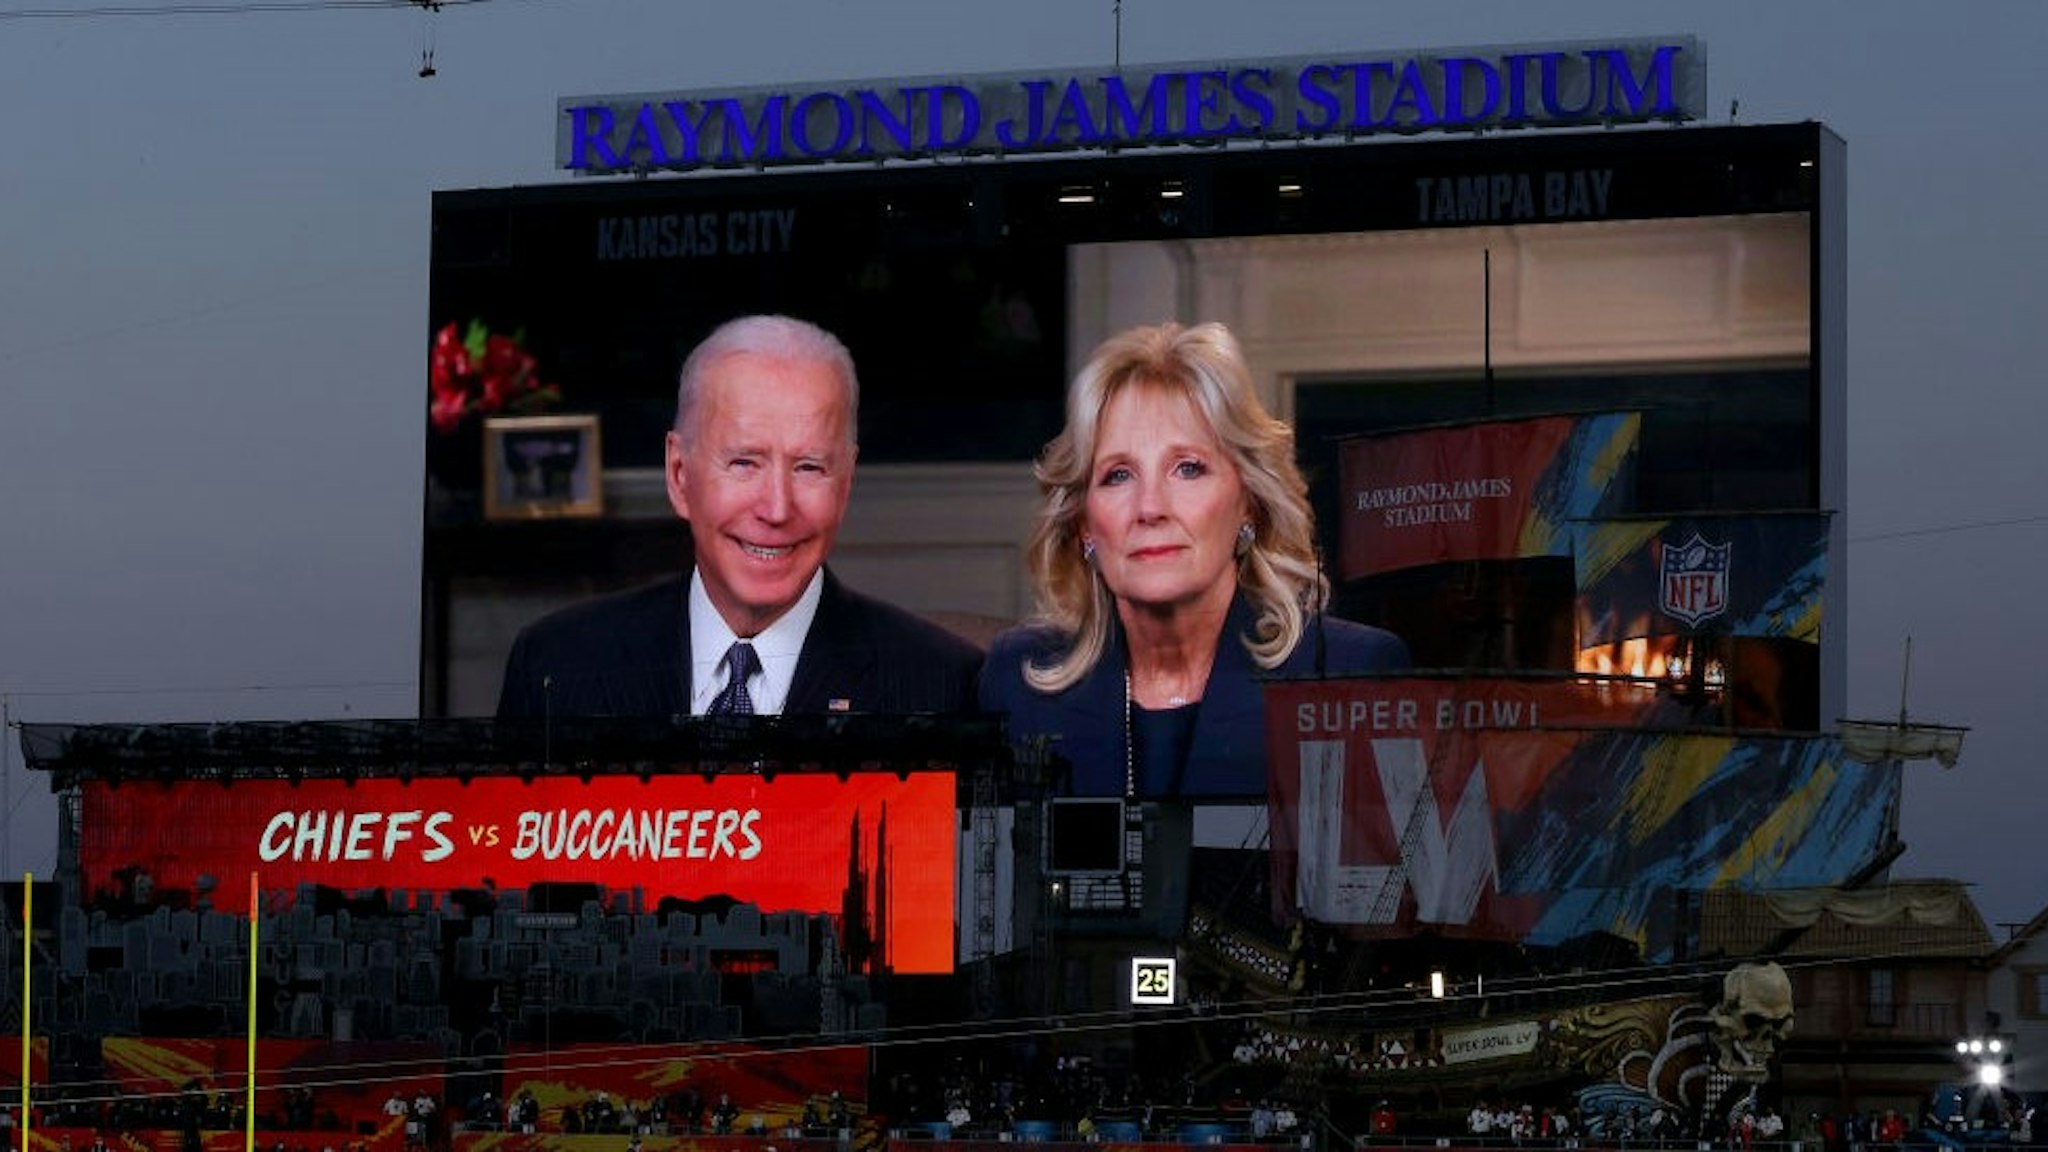 TAMPA, FLORIDA - FEBRUARY 07: U.S. president Joe Biden and First Lady Dr. Jill Biden deliver an address in Super Bowl LV at Raymond James Stadium on February 07, 2021 in Tampa, Florida. (Photo by